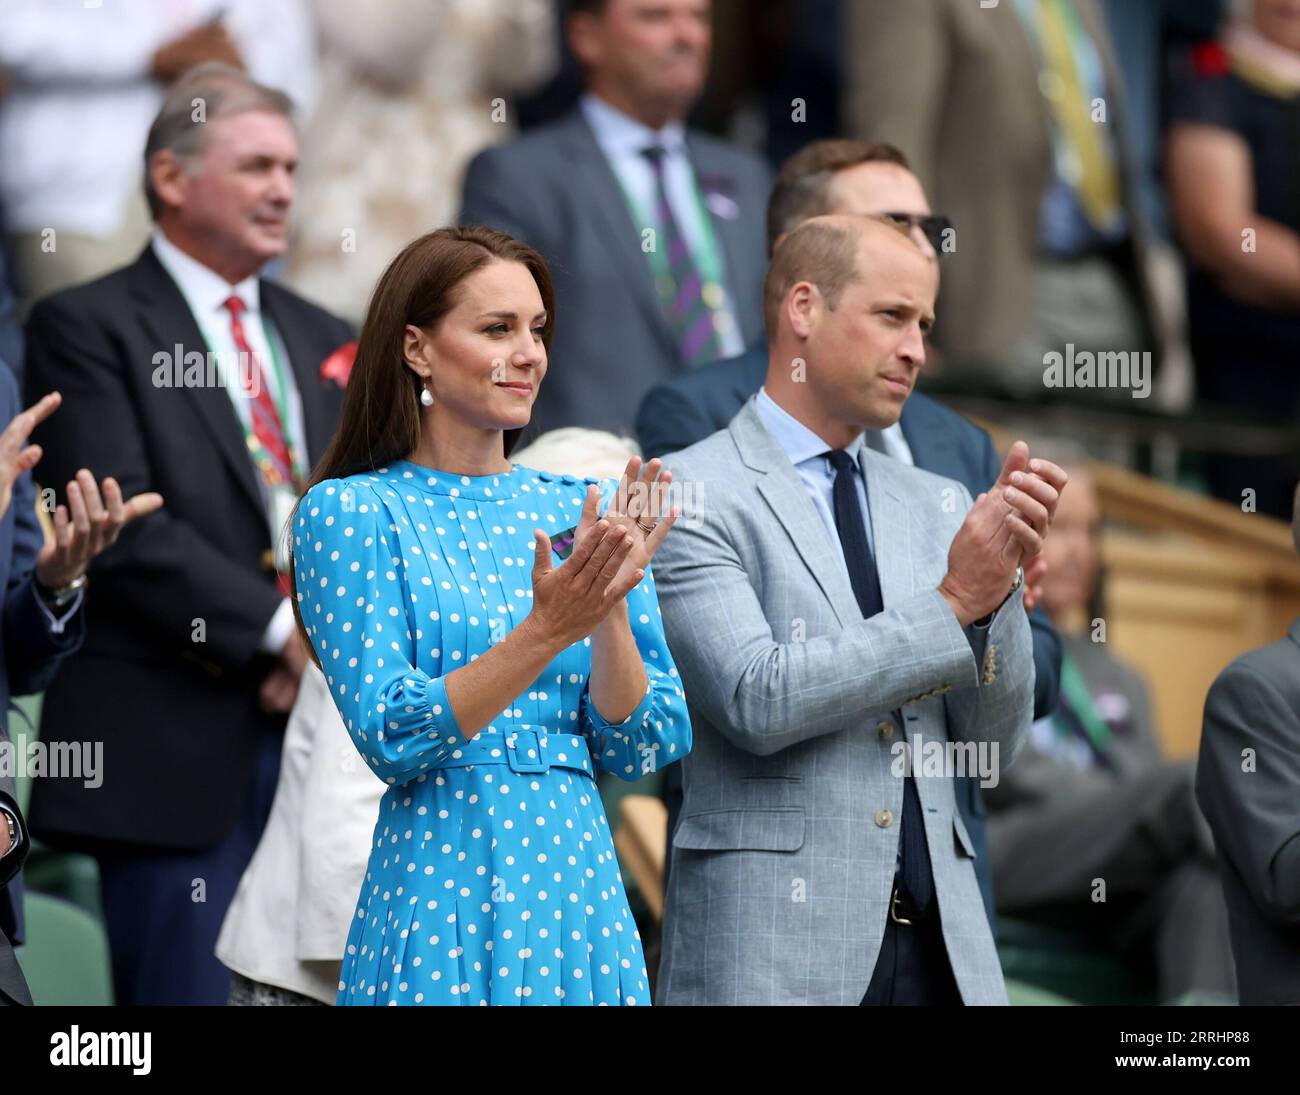 220706 -- LONDON, July 6, 2022 -- Britain s Prince William R, front, Duke of Cambridge, and his wife Catherine L, front, Duchess of Cambridge, applaud in the royal box during the men s singles quarter-final match between Novak Djokovic of Serbia and Jannik Sinner of Italy at Wimbledon Tennis Championship in London, Britain, on July 5, 2022.  SPBRITAIN-LONDON-TENNIS-WIMBLEDON-MEN S SINGLES-QUARTERFINALS LixYing PUBLICATIONxNOTxINxCHN Stock Photo